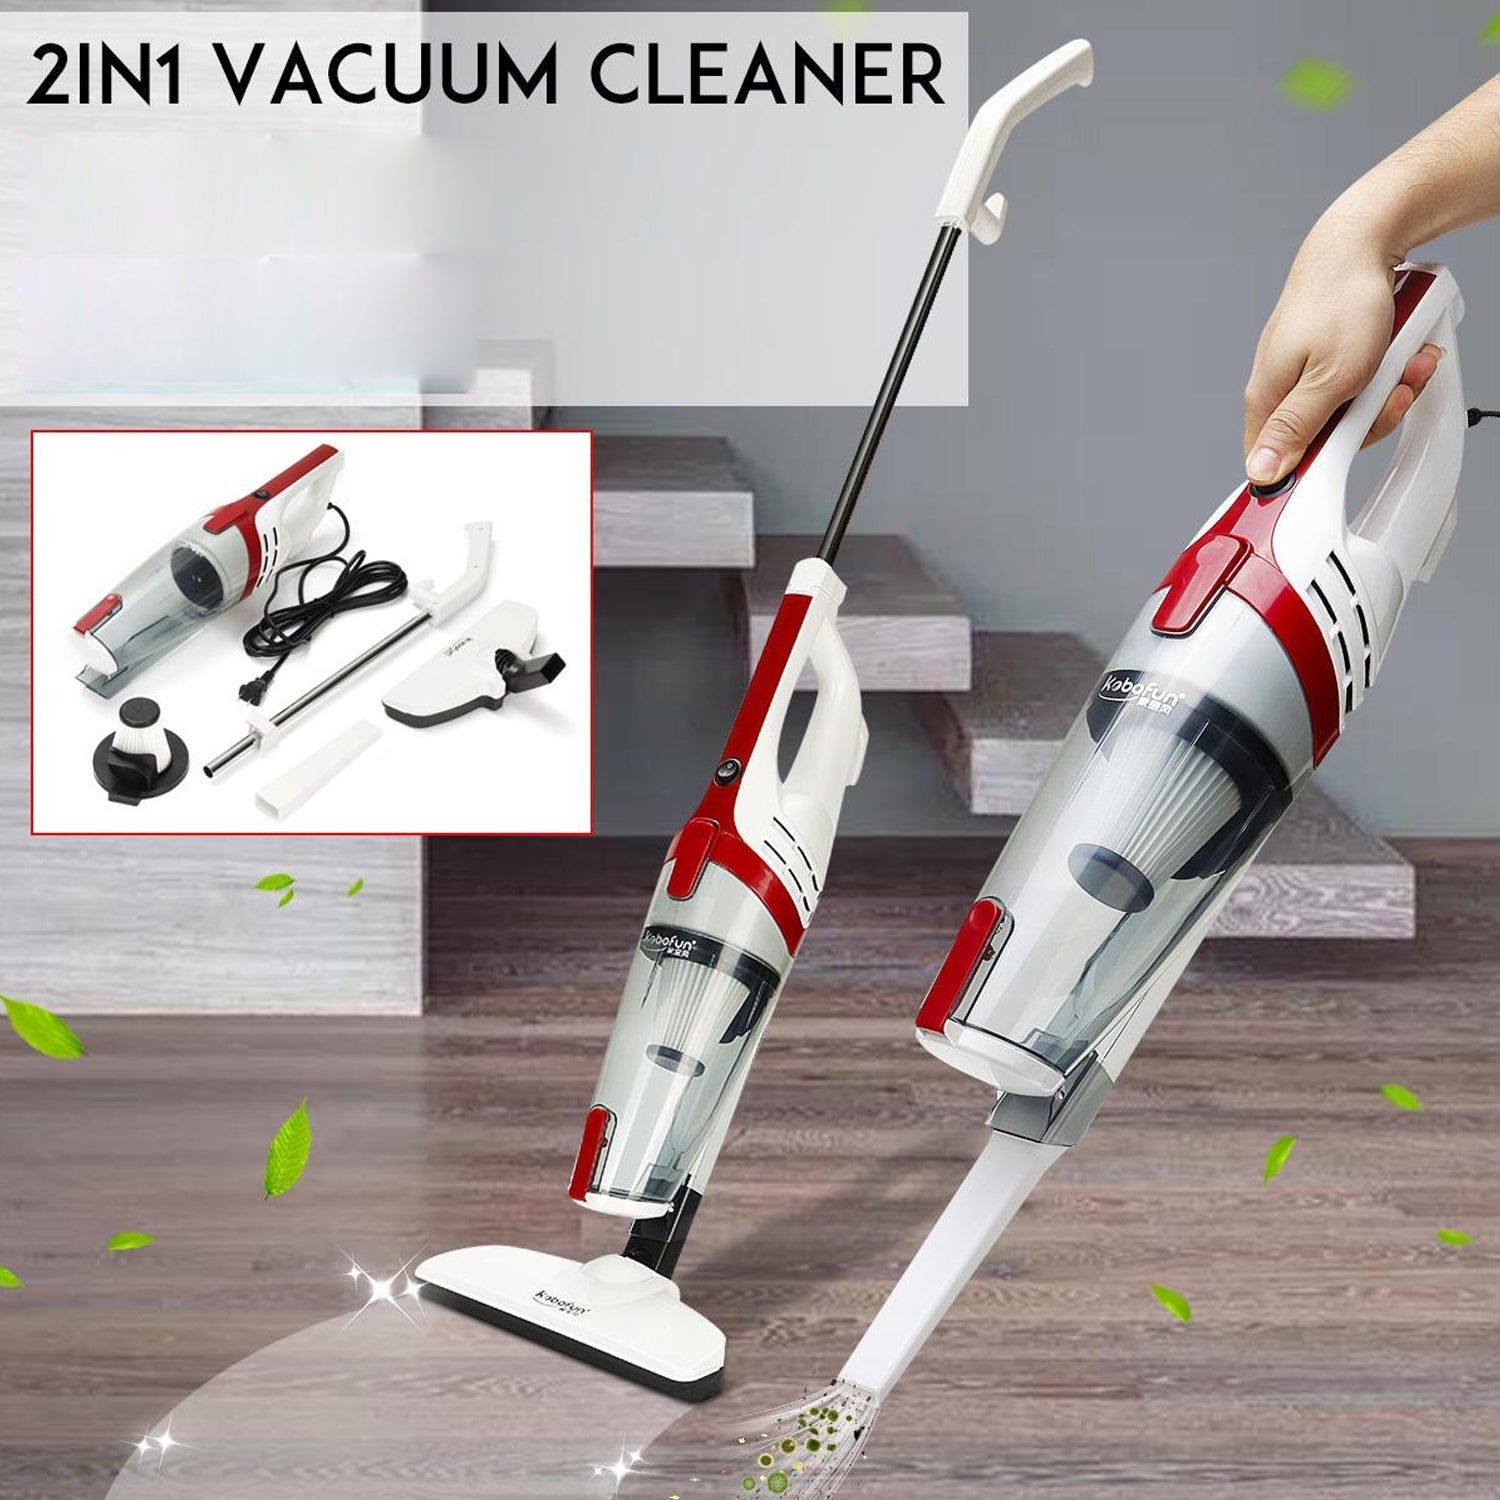 4046 Vacuum Cleaner Handheld & Stick for Home and Office Use DeoDap